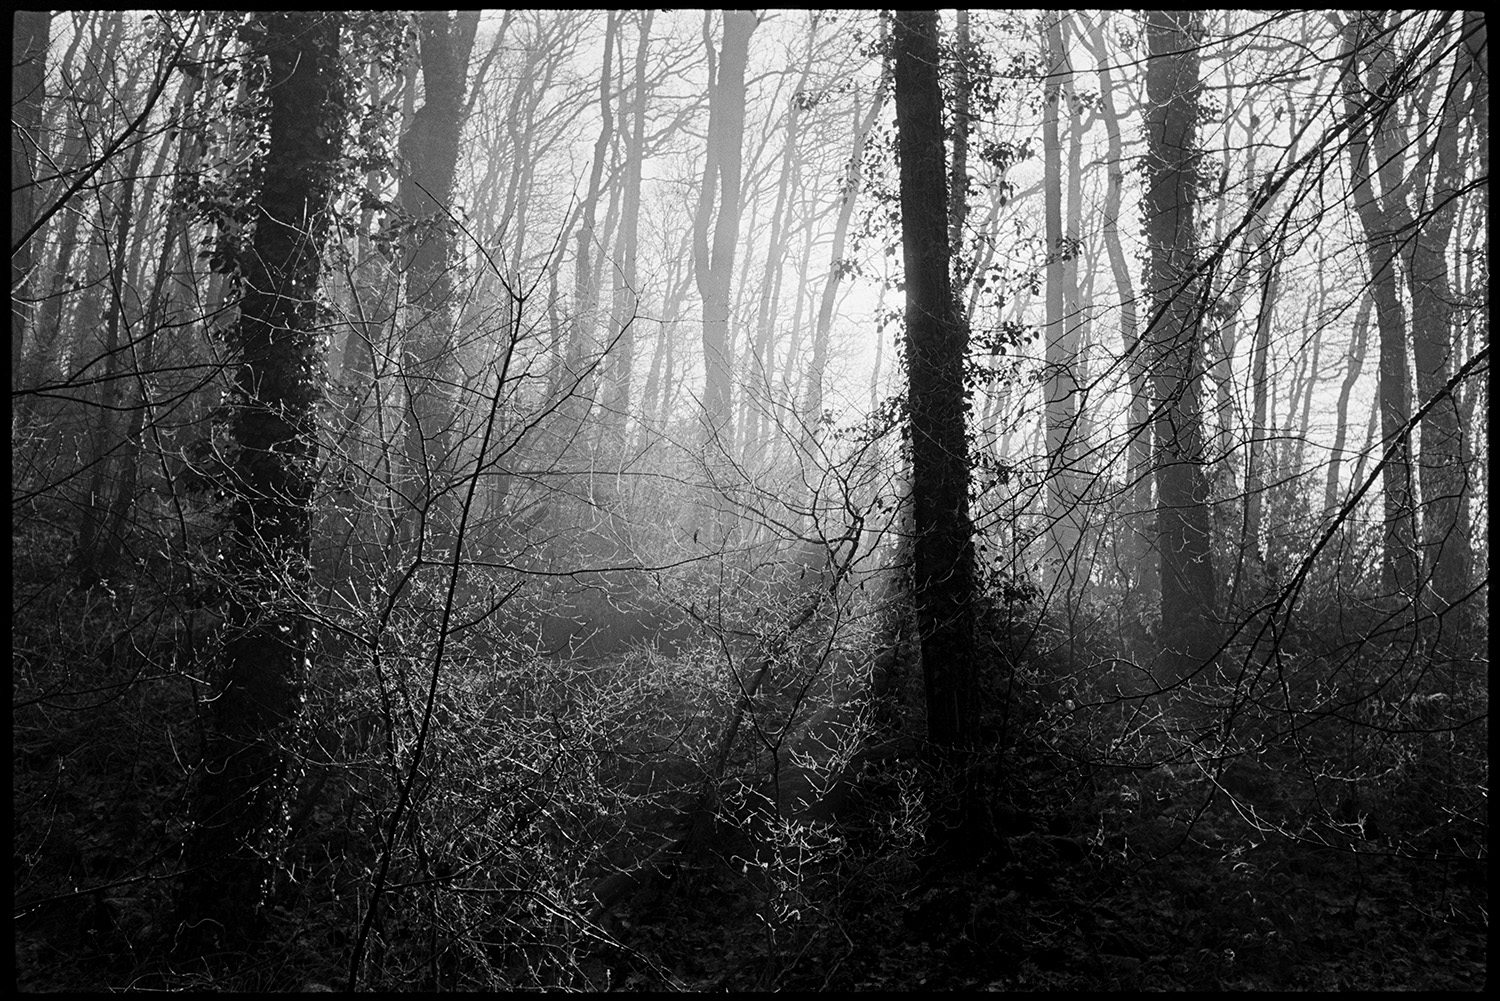 Wood, frosty trees in early morning light. 
[Early morning misty view of sunlight shining through frosty undergrowth and woodland at Halsdon, Dolton.]